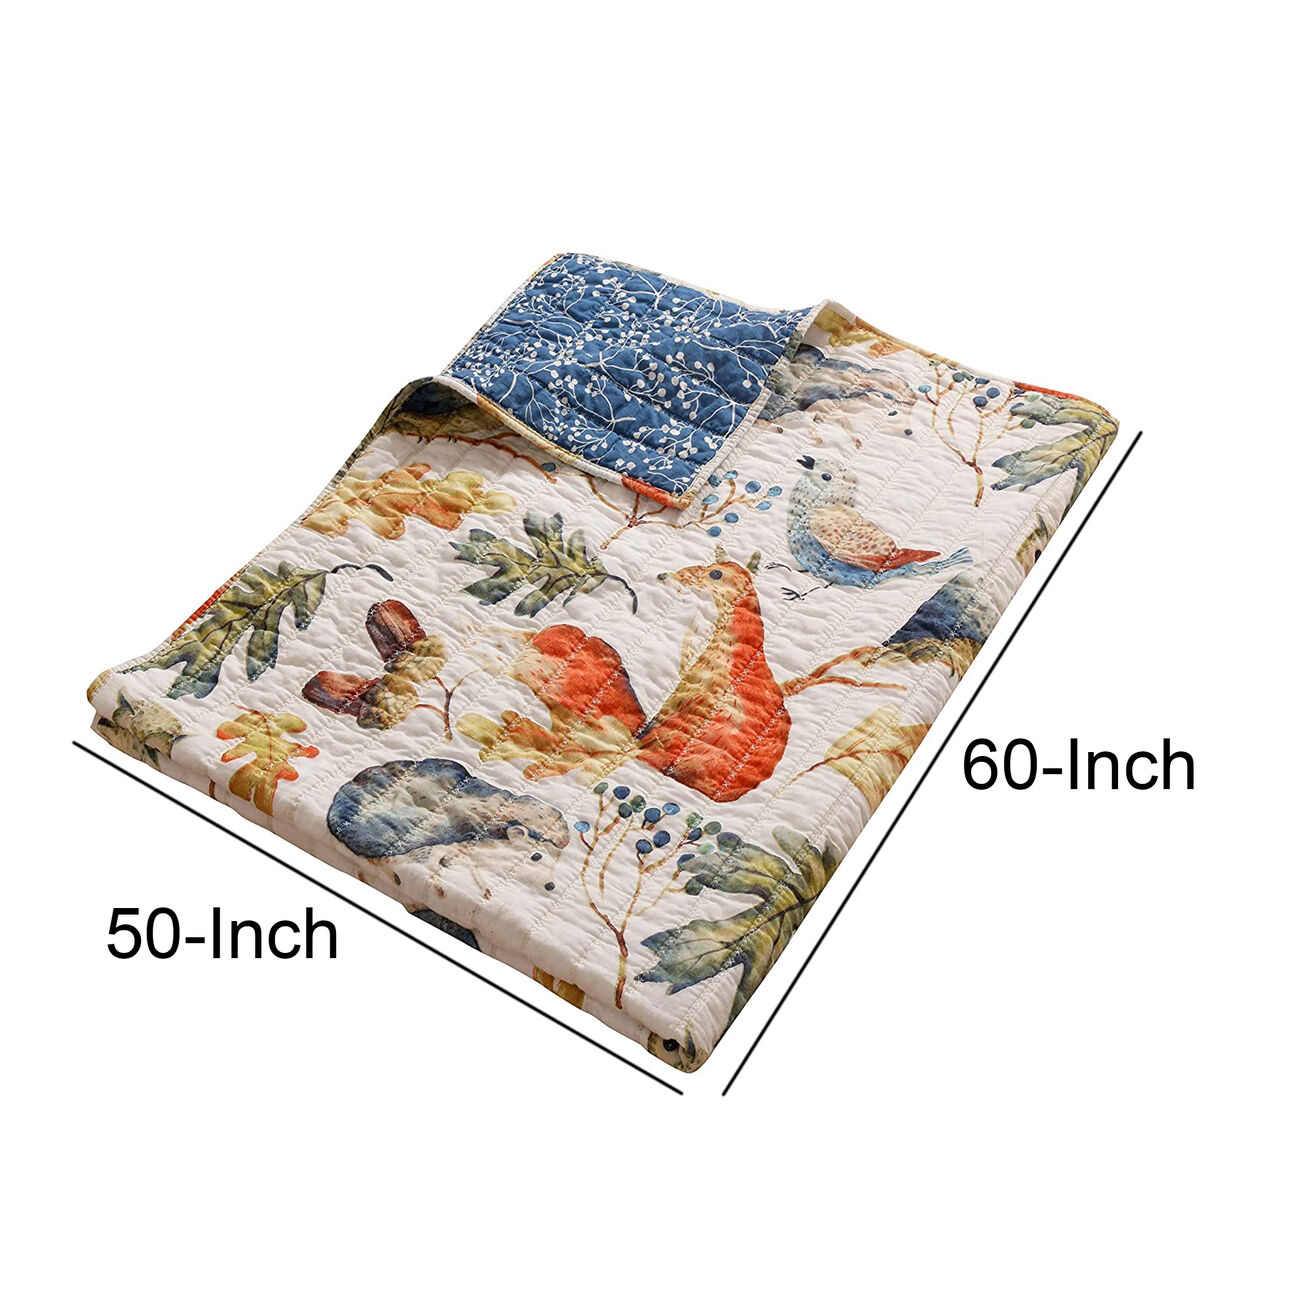 60 x 50 Inches Quilted Polyester Throw with Fox and Owls Print, Multicolor